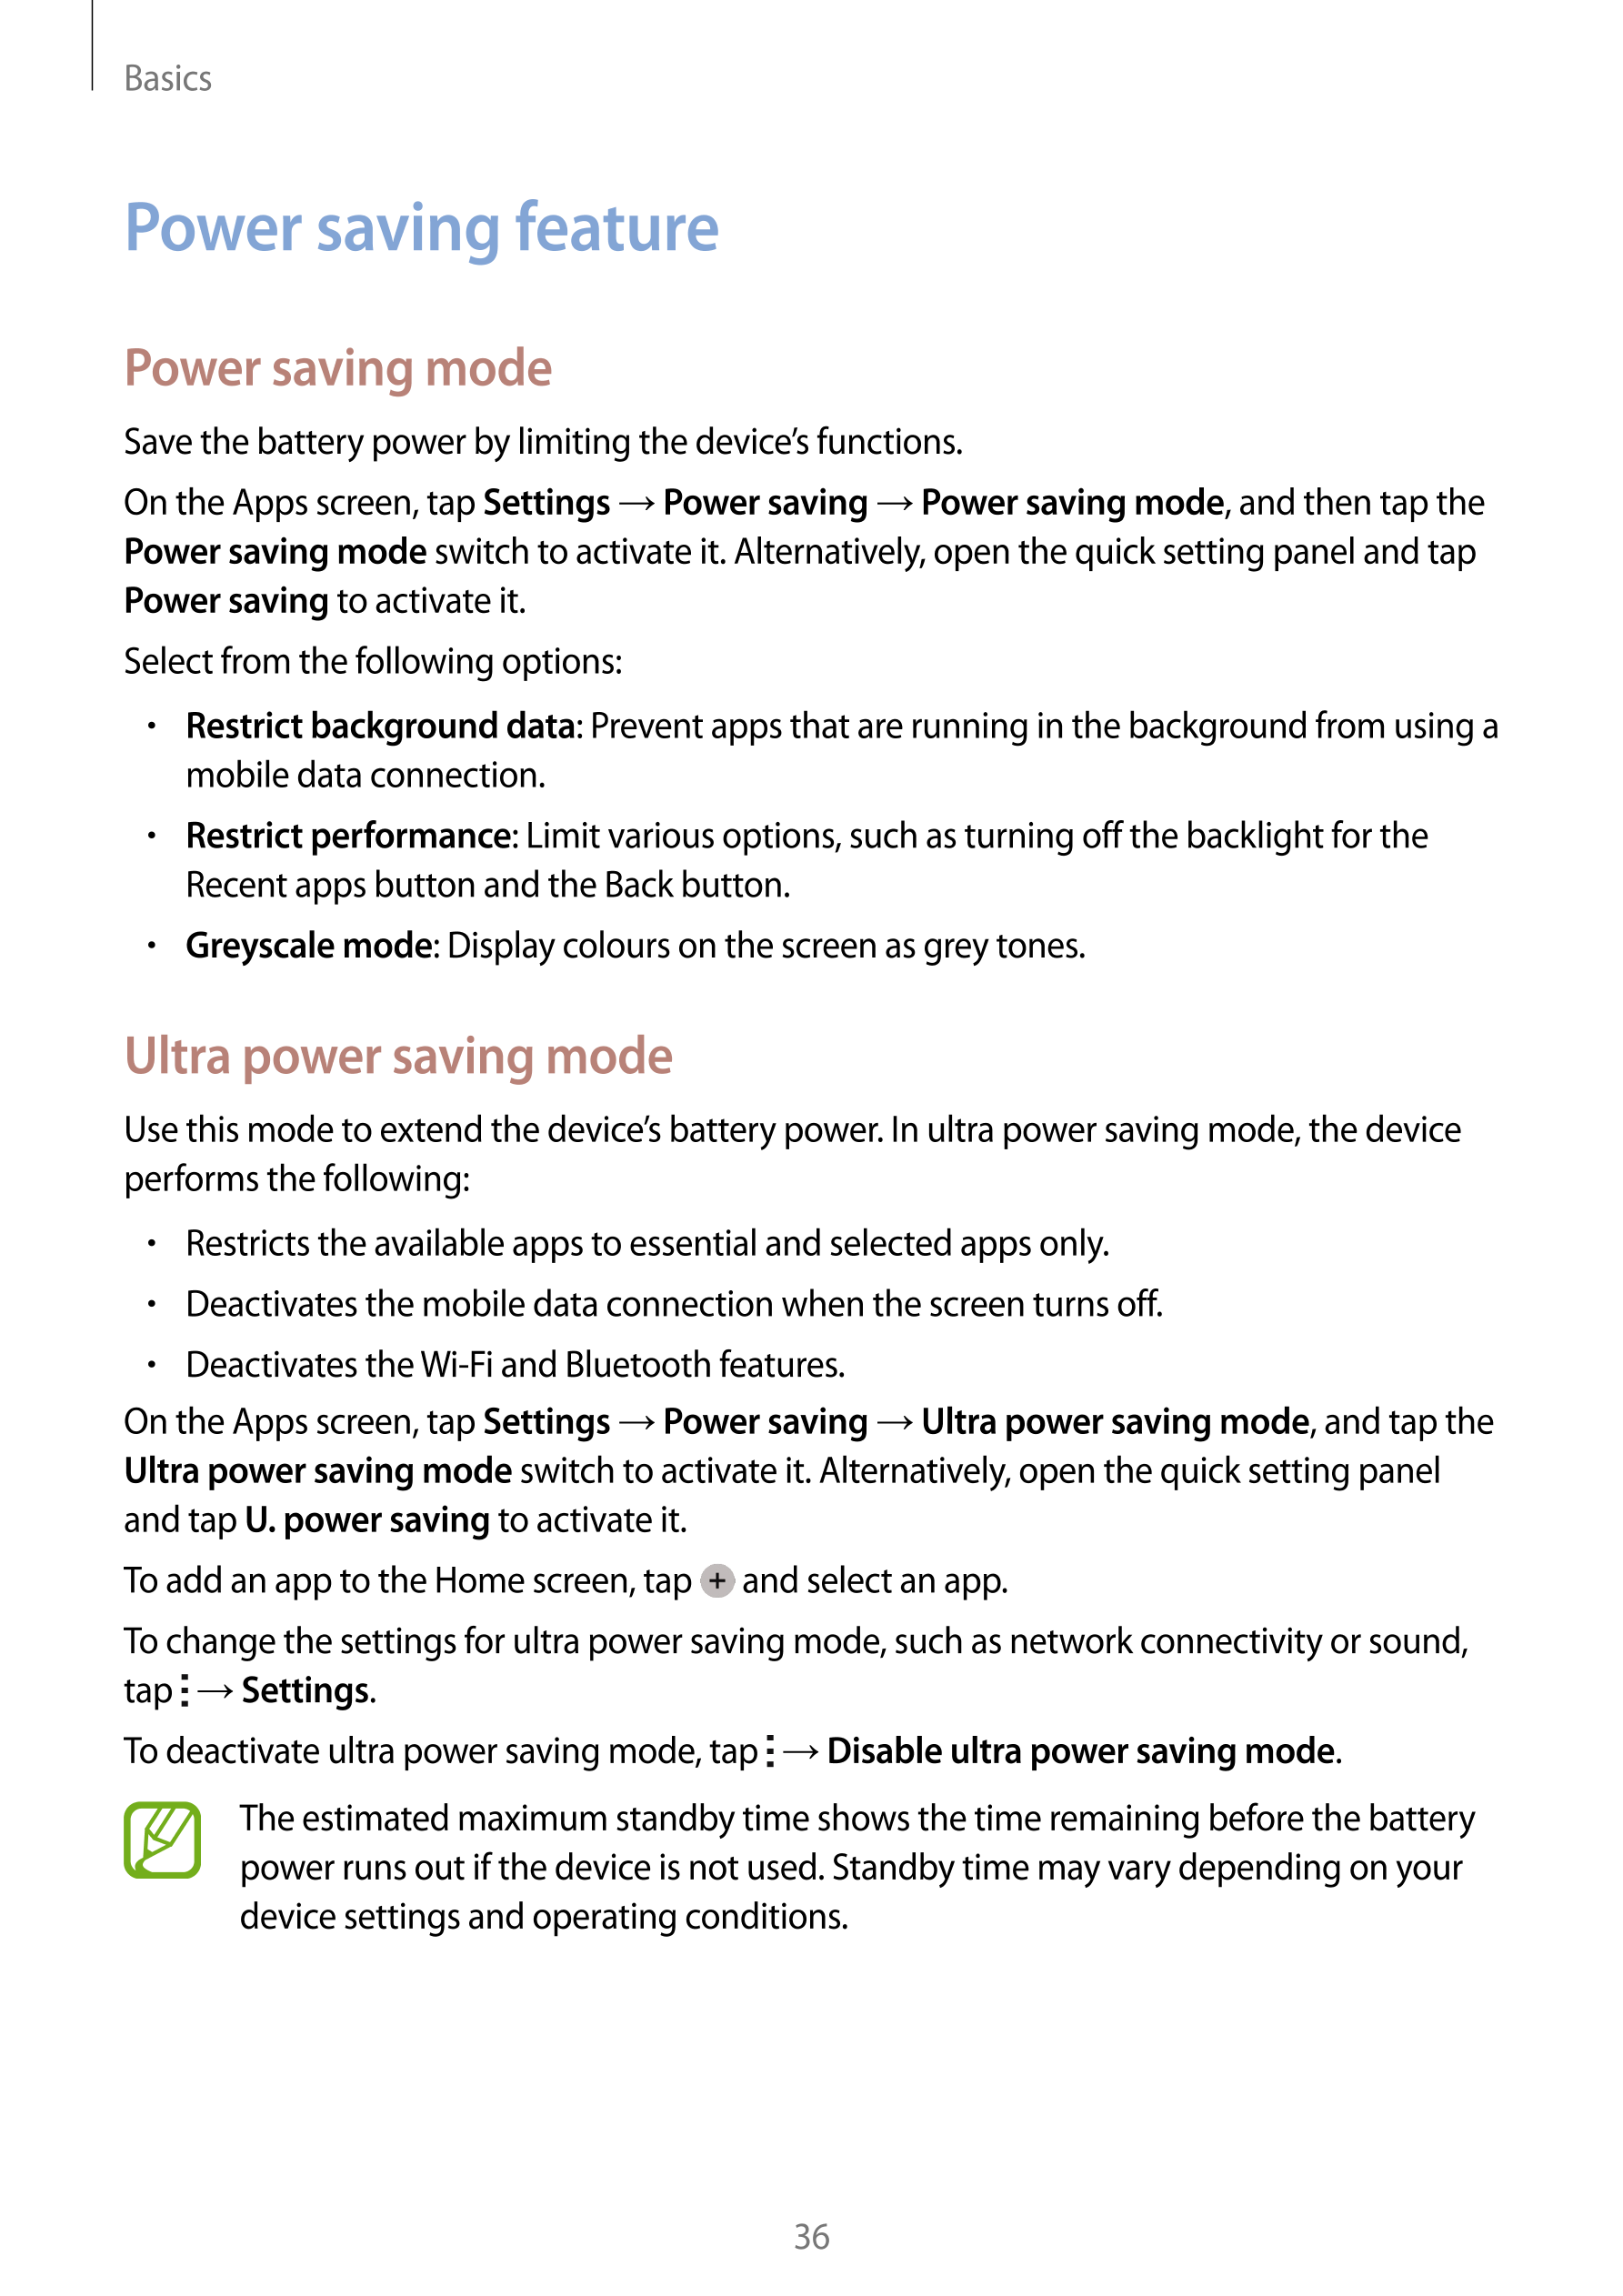 Basics
Power saving feature
Power saving mode
Save the battery power by limiting the device’s functions.
On the Apps screen, tap